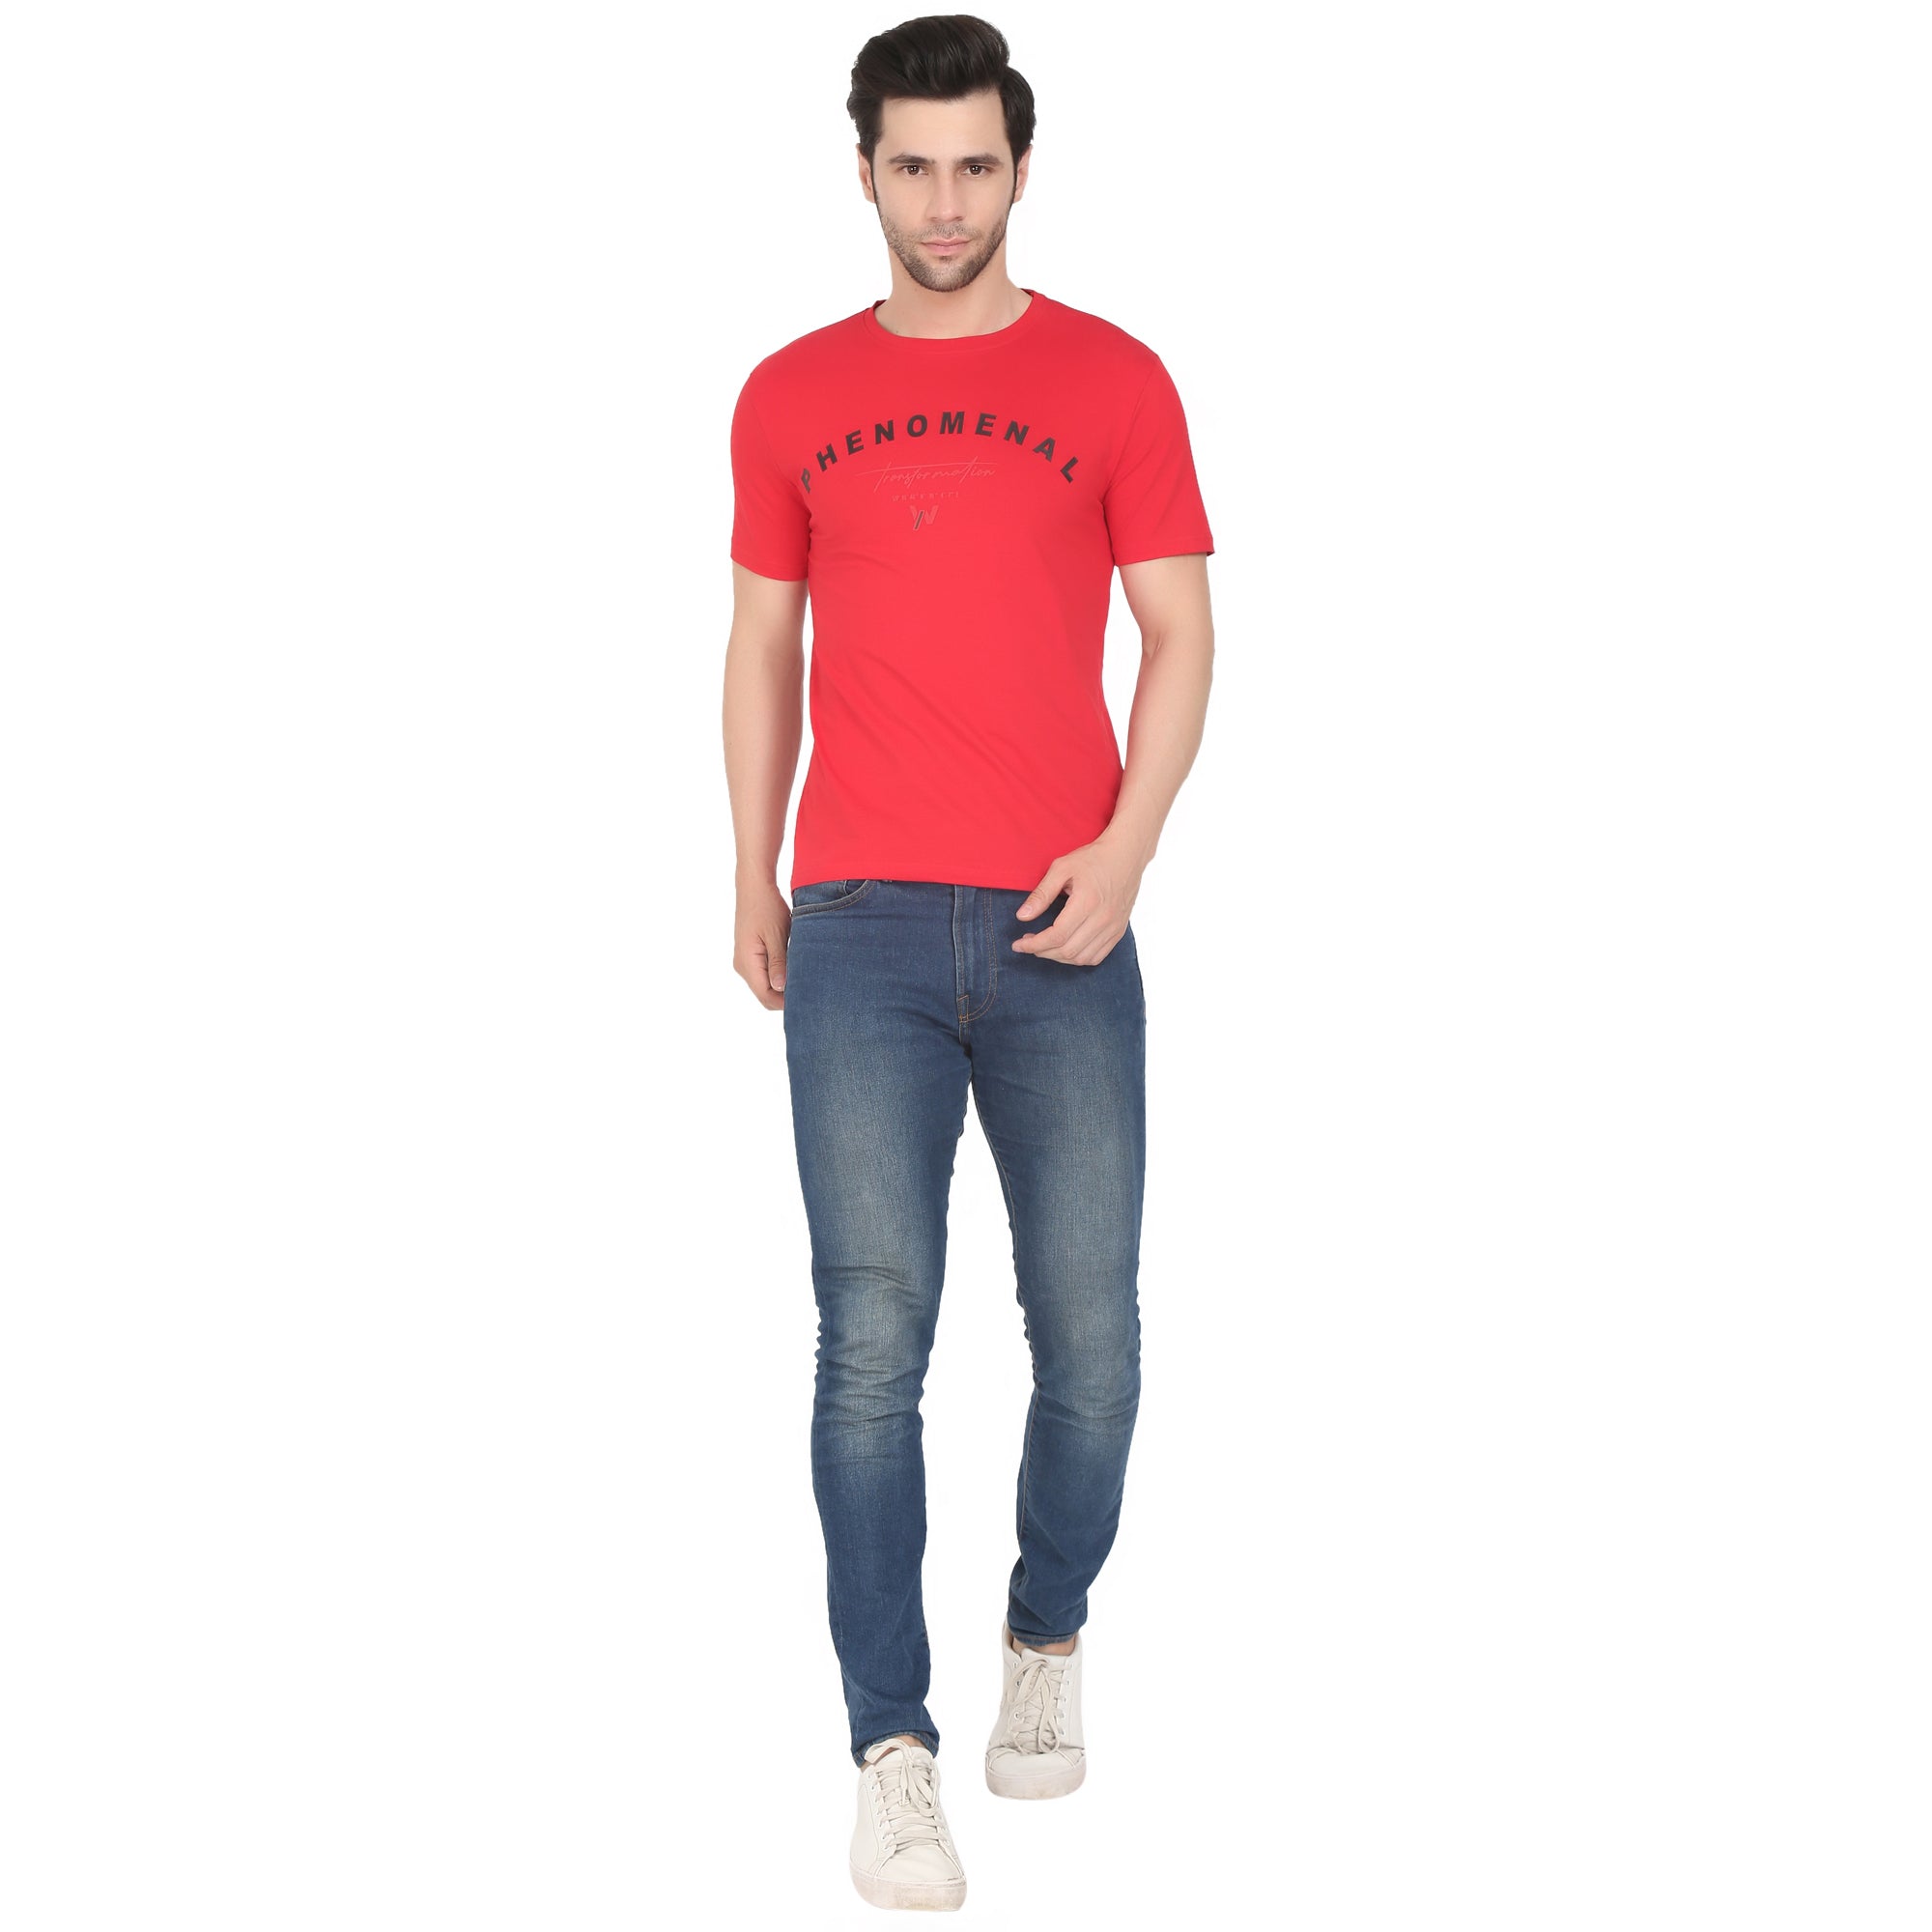 Men Four Way Stretch Cool Cotton Printed T-shirt - Red Colour